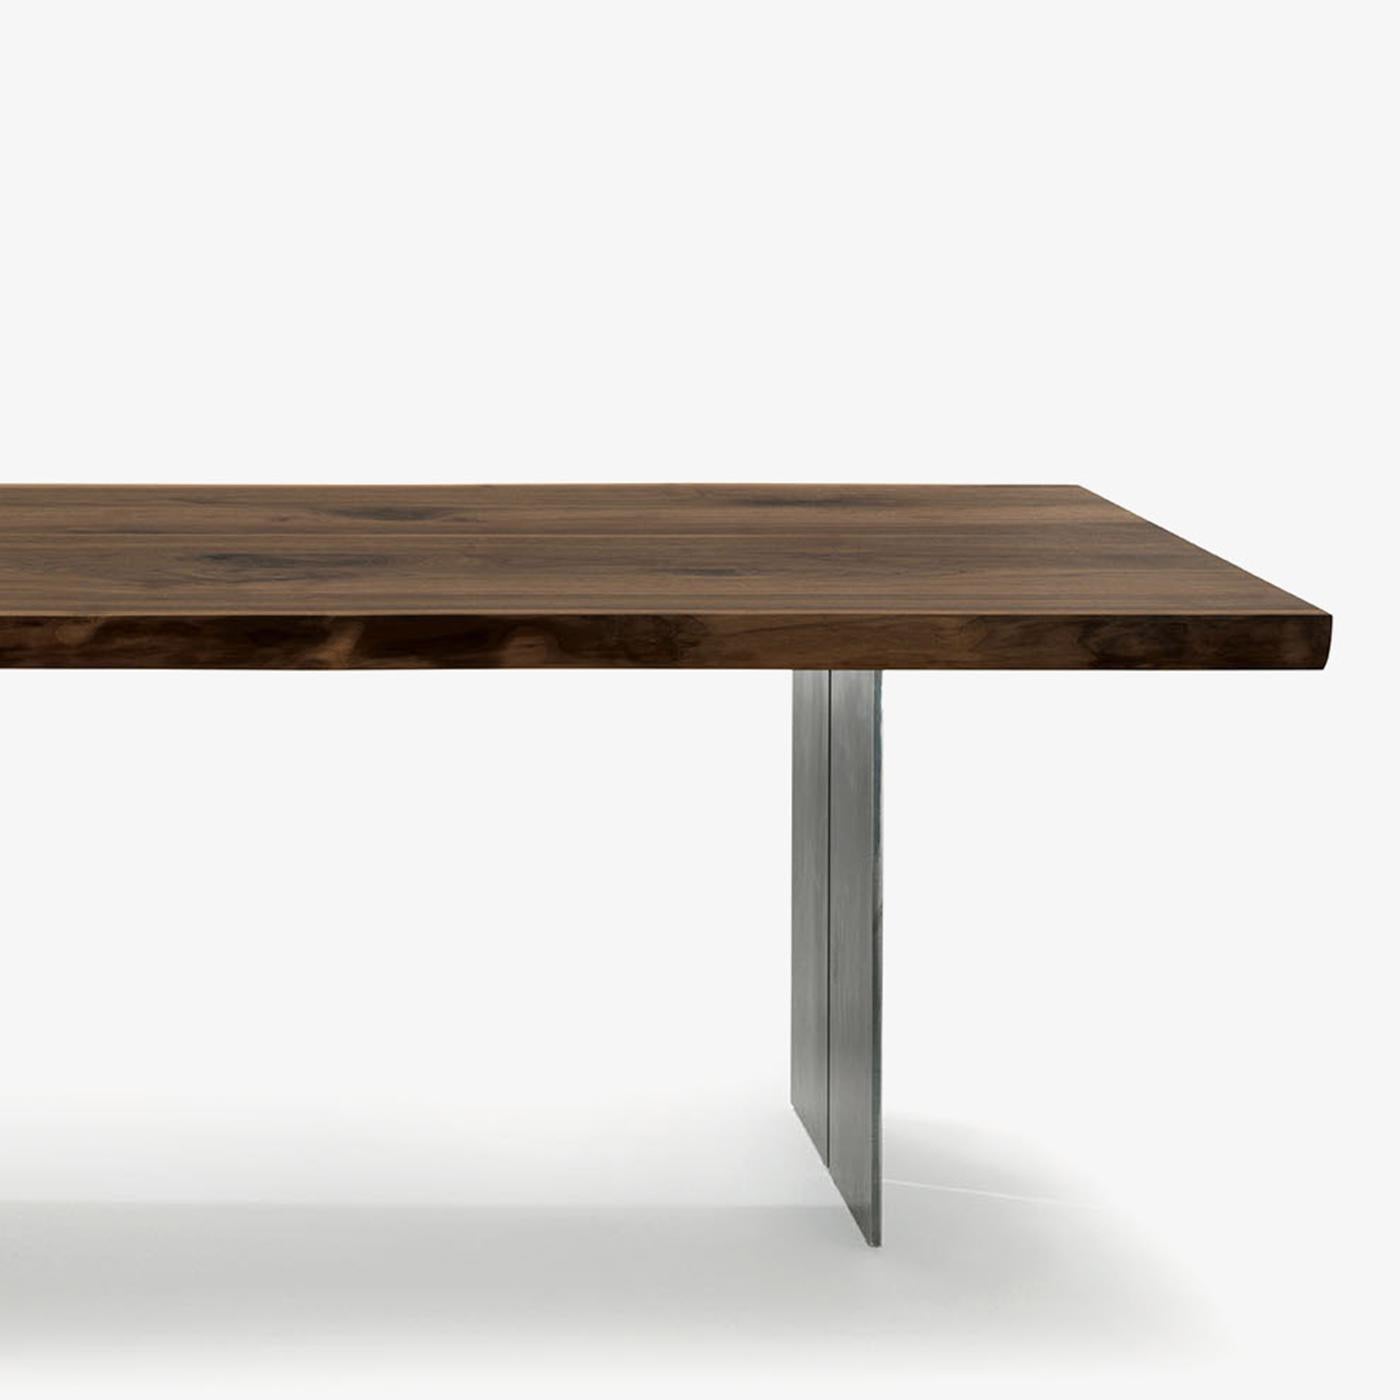 Table Real Edges and Steel with solid walnut top, 6.5 mm thickness 
and with real wood slats edges. With 2 steel feet which are both separated
by a small space.Feet in steel in oiled finish. Wood treated with natural pine wax.
Available in: 
L